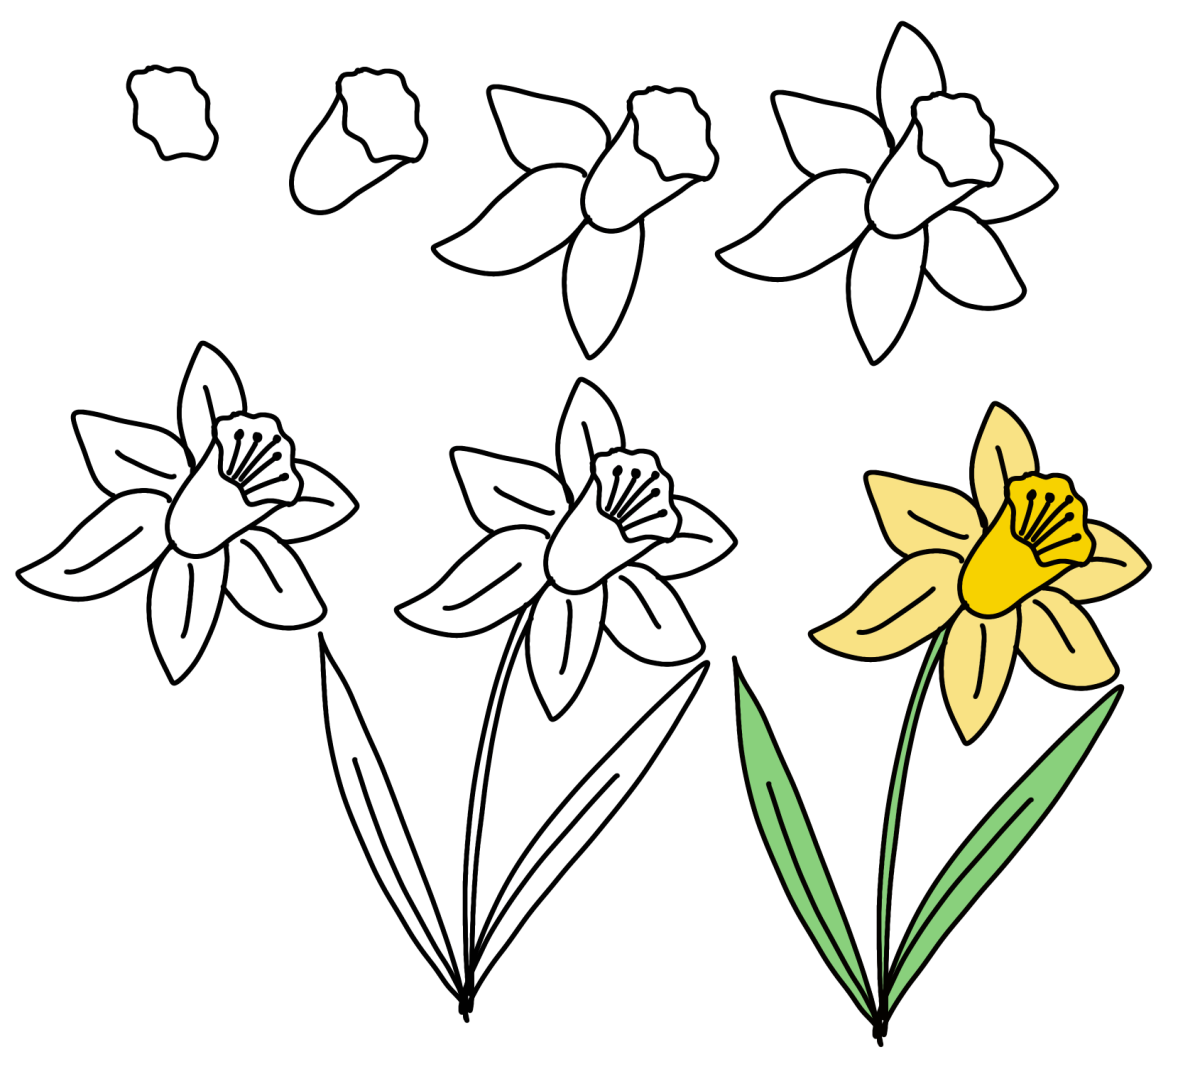 Image contains seven step by step images for how to draw a daffodil, as described in the post.